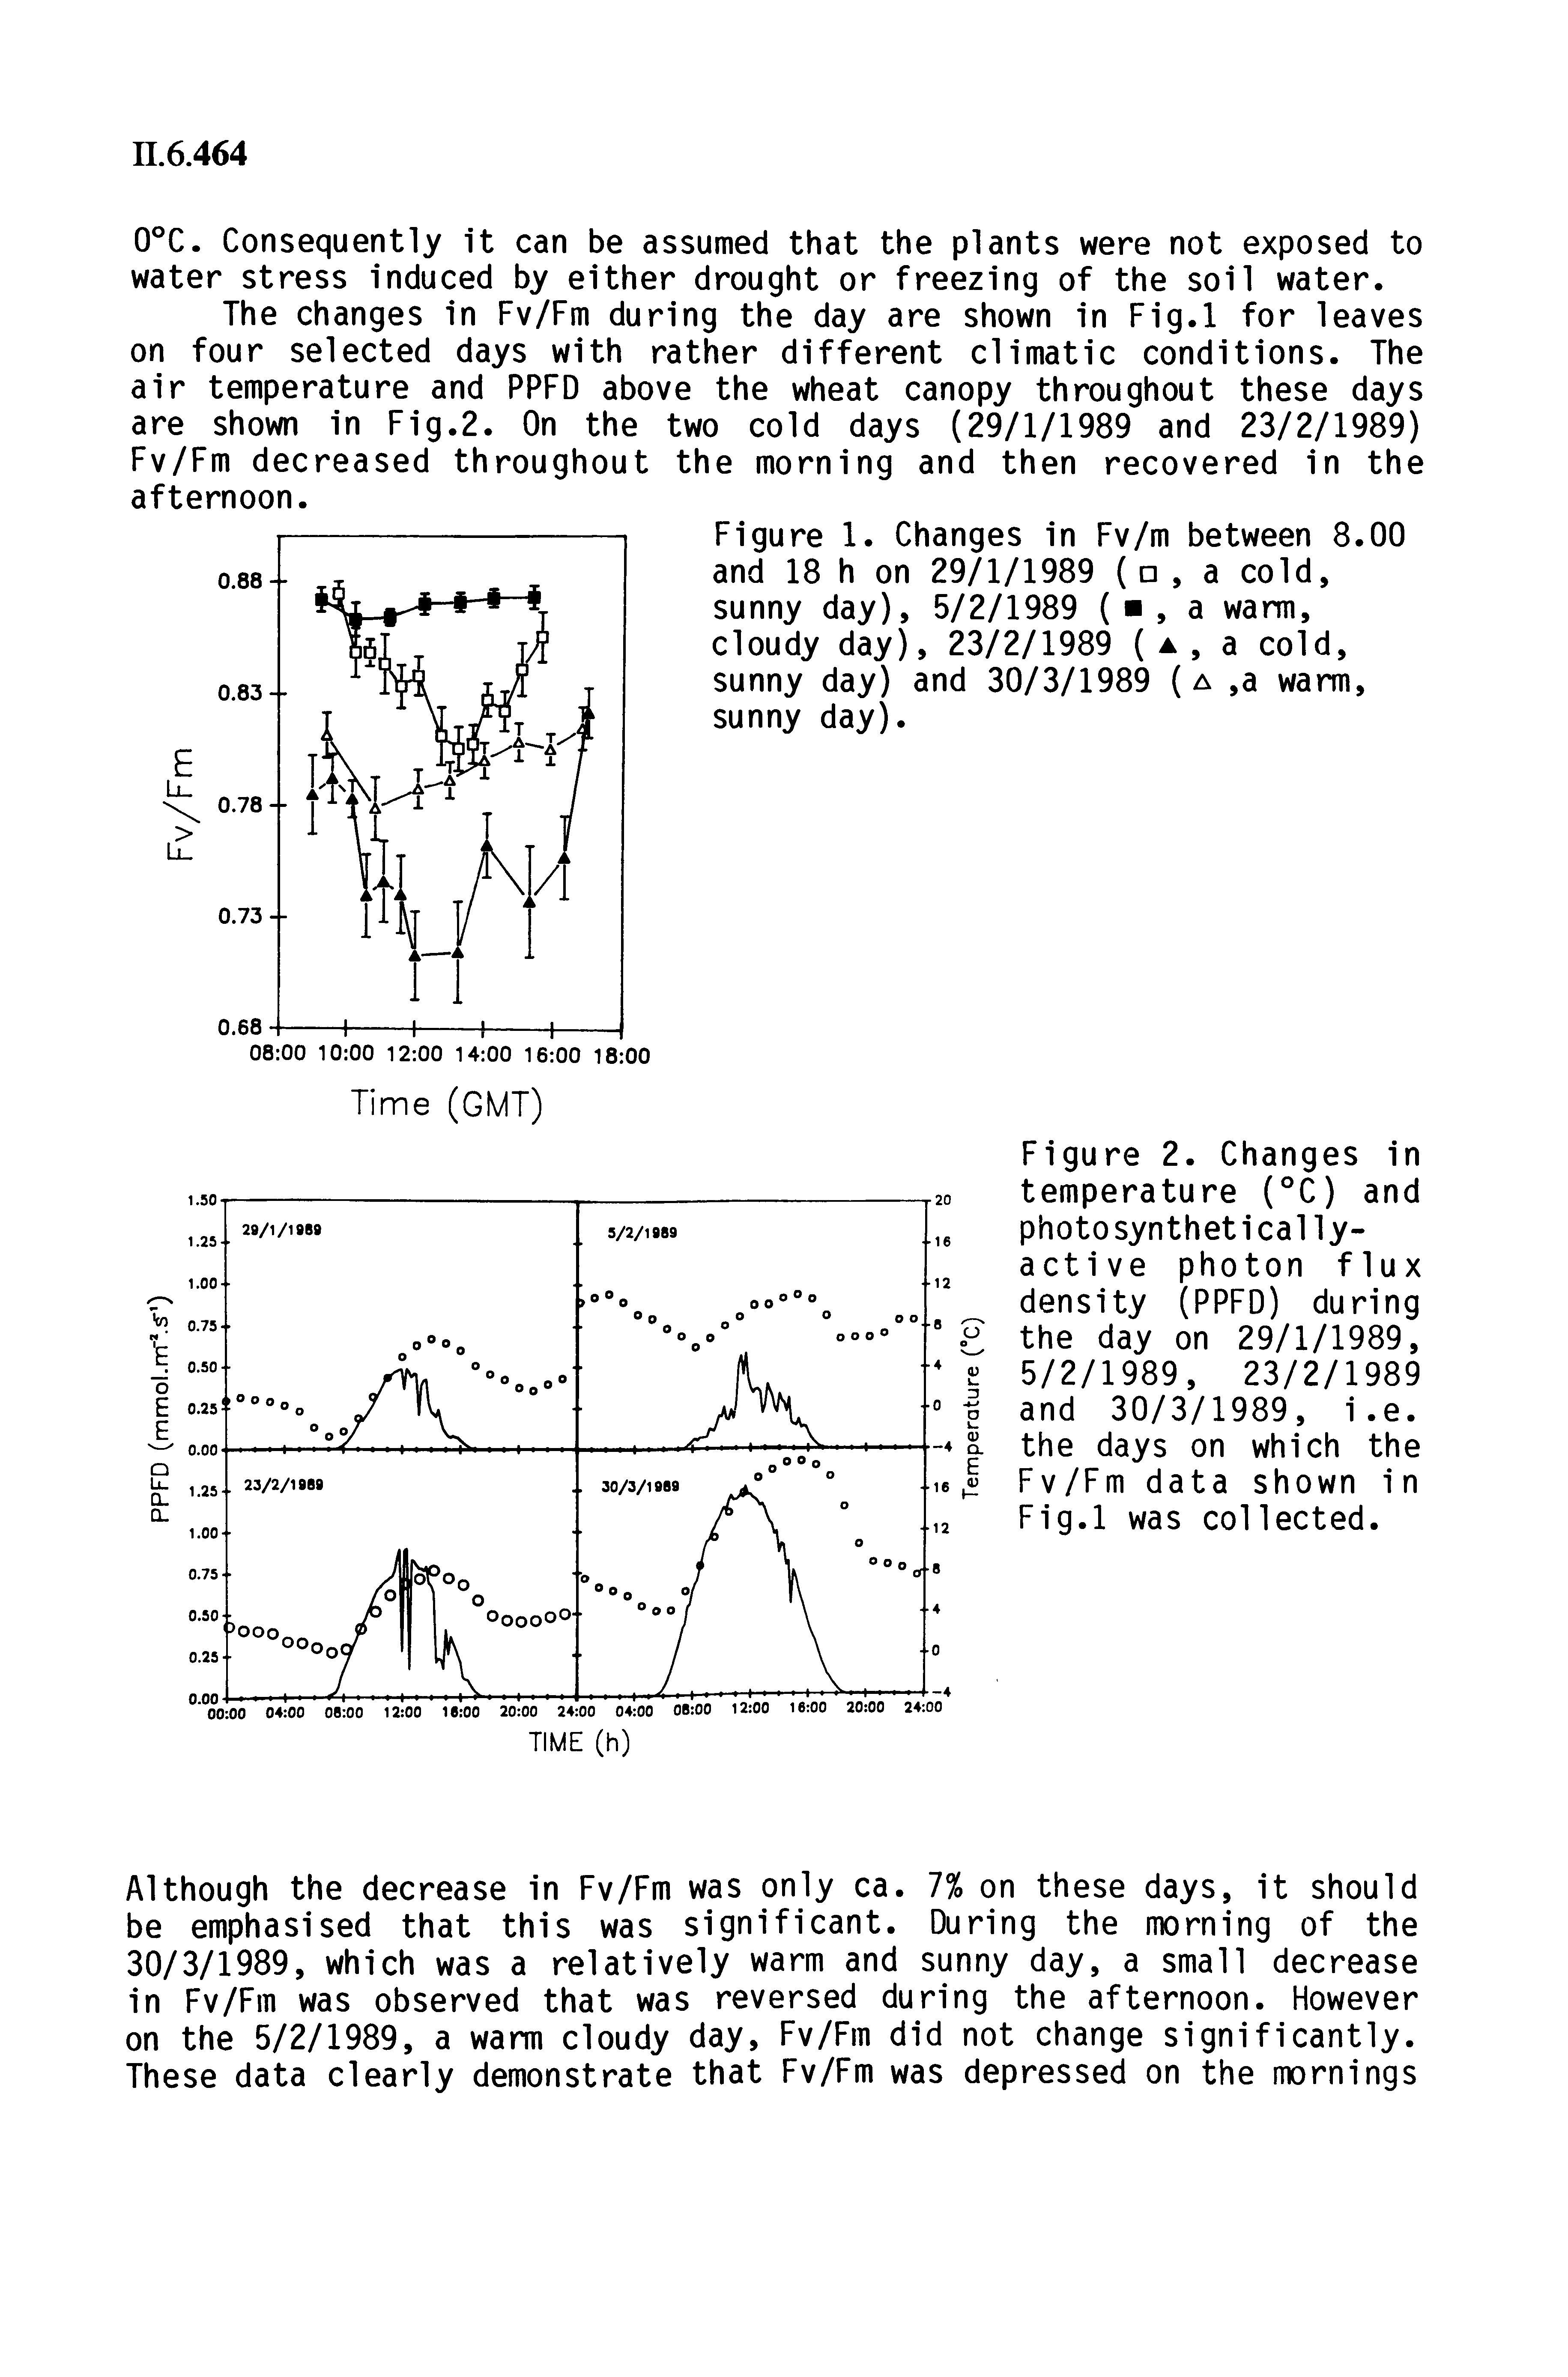 Figure 2. Changes in temperature (°C) and photosynthetically-active photon flux density (PPFD) during the day on 29/1/1989, 5/2/1989, 23/2/1989...